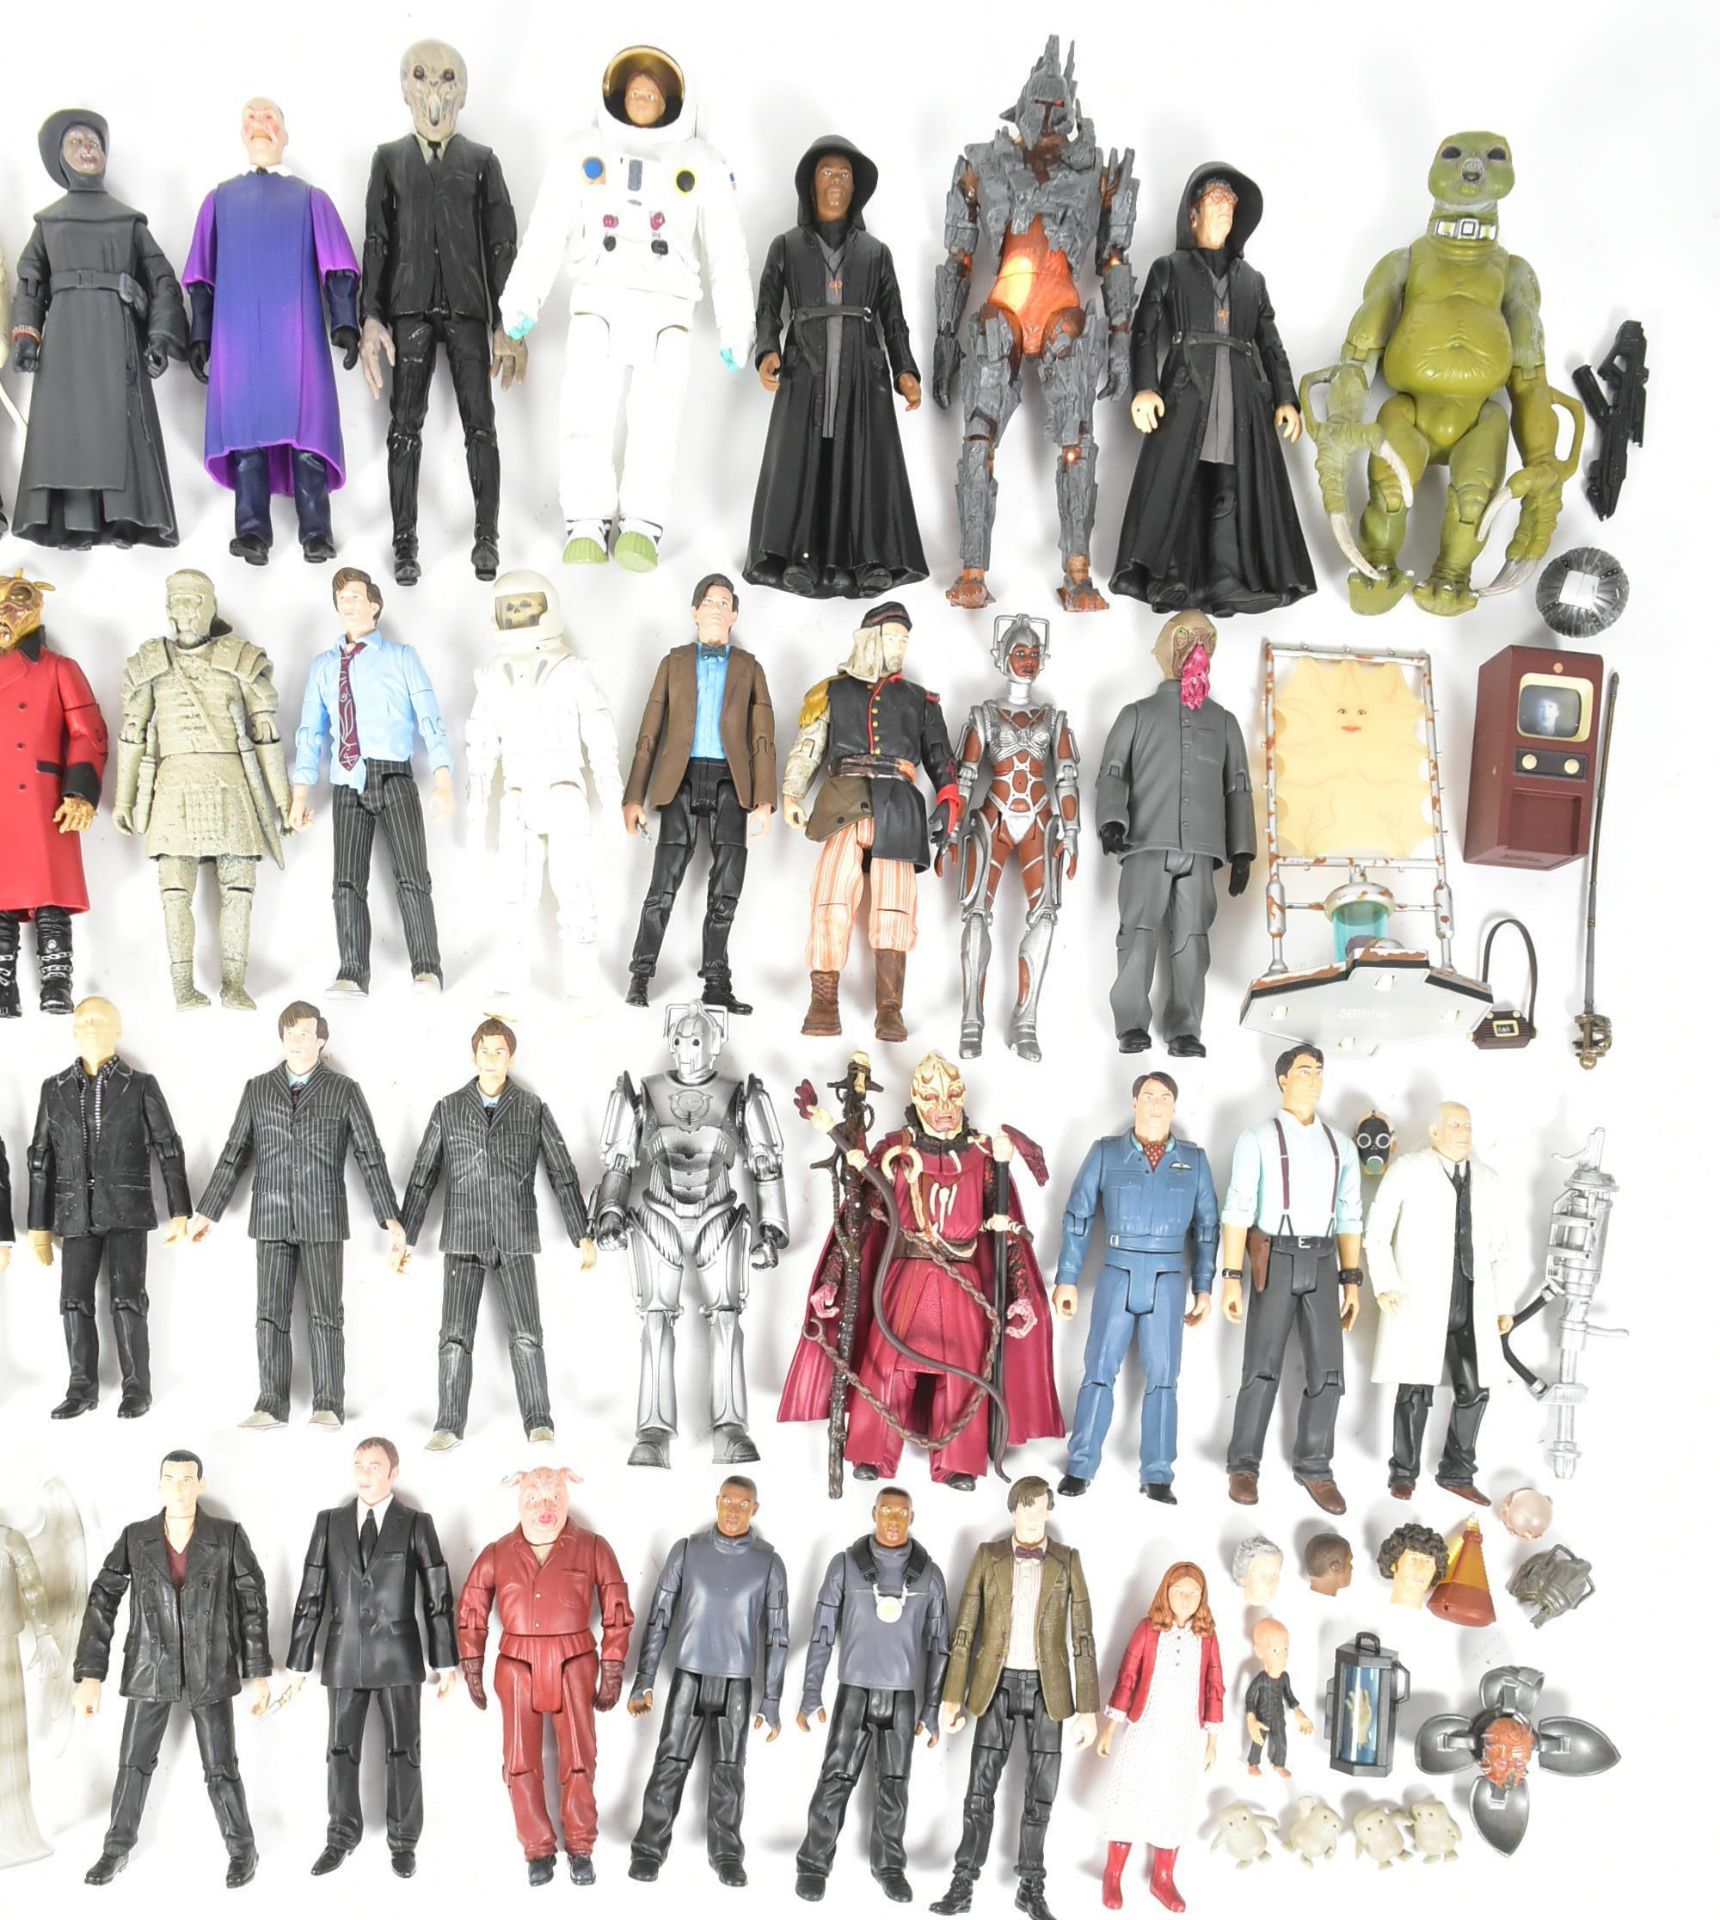 DOCTOR WHO - CHARACTER OPTIONS - ACTION FIGURES - Image 8 of 10